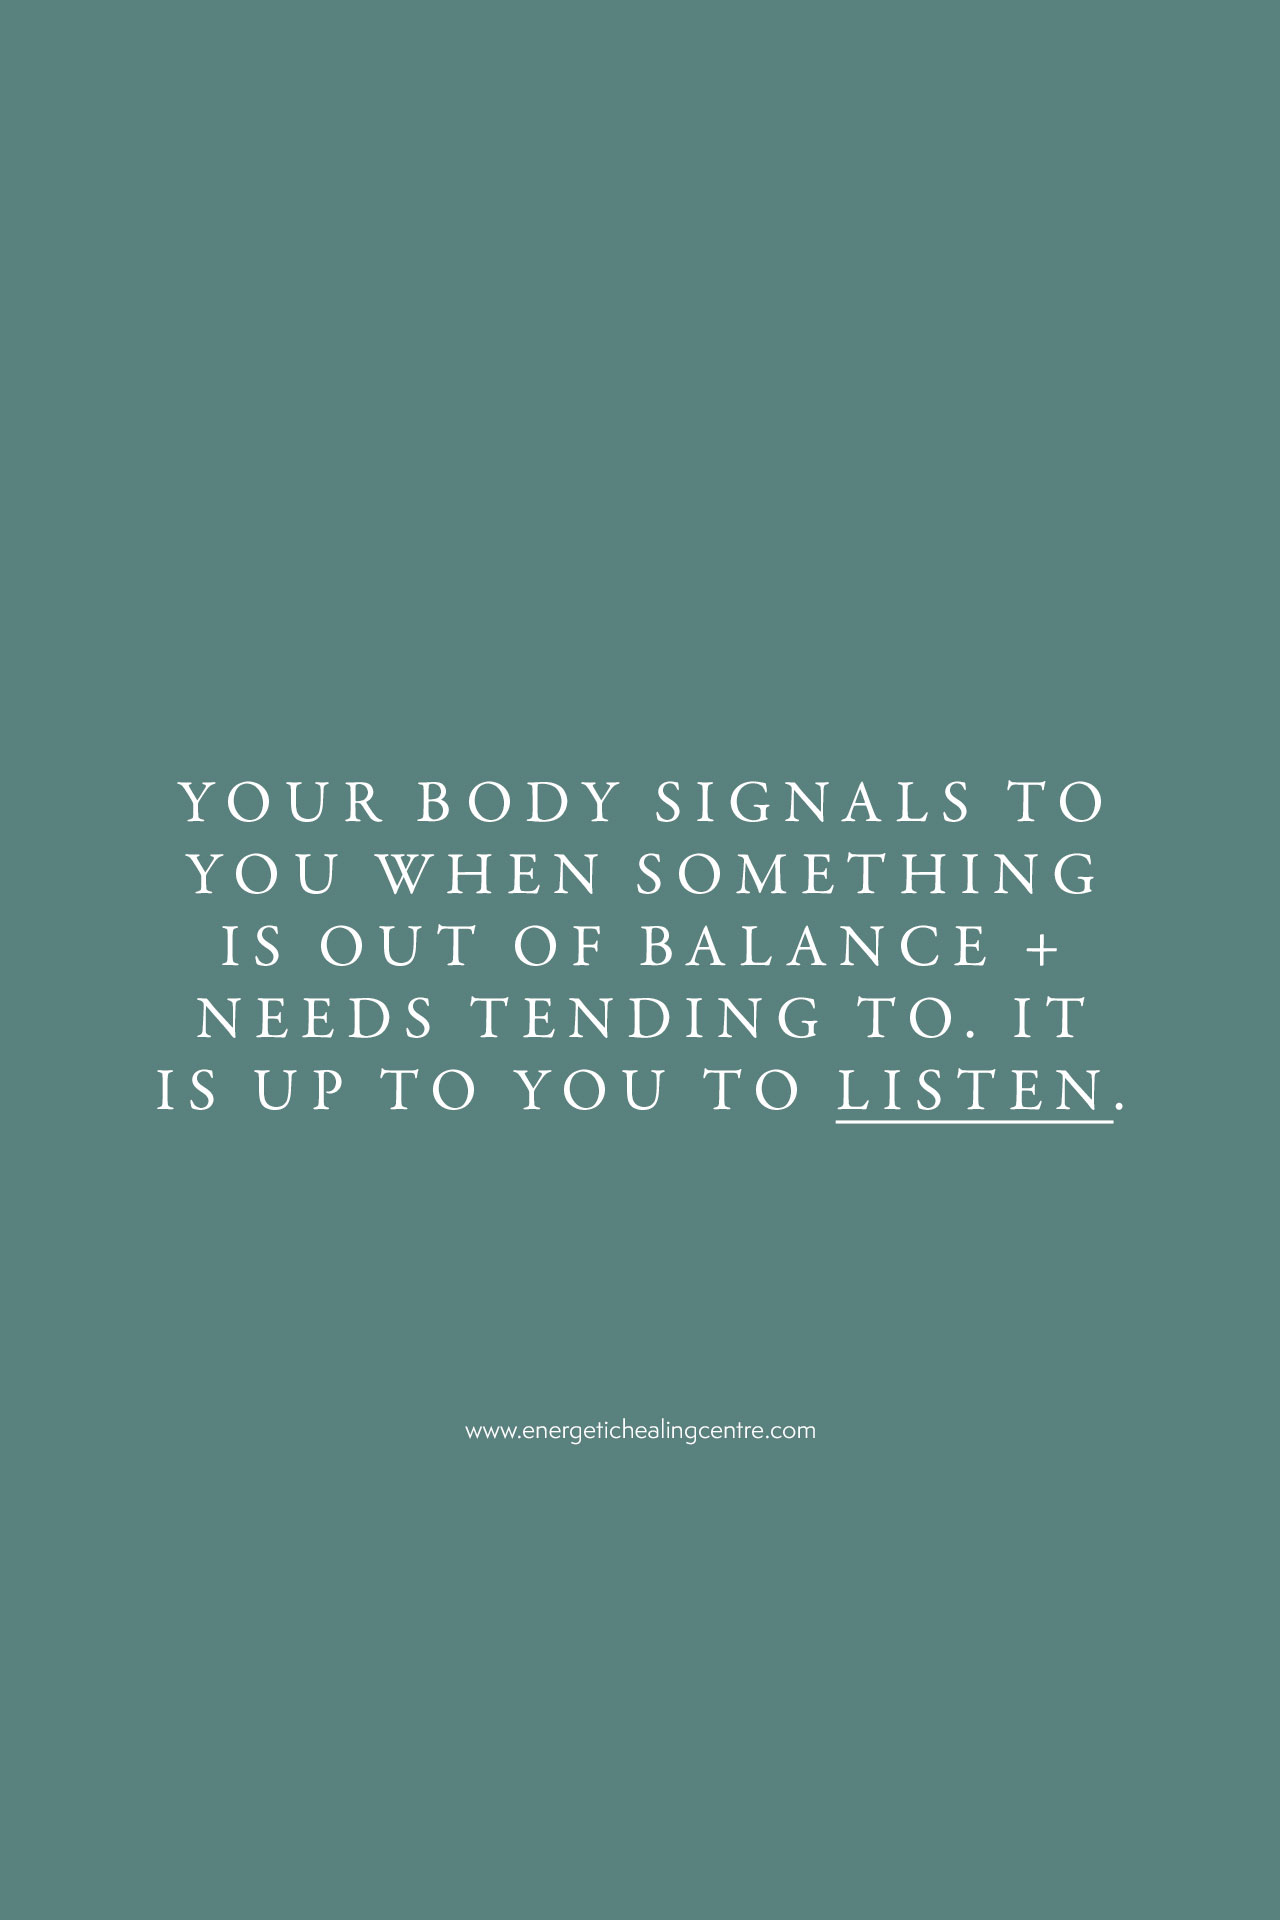 It’s your body signaling to you that something is out of balance and needs to be tended to. It’s up to you to listen. 